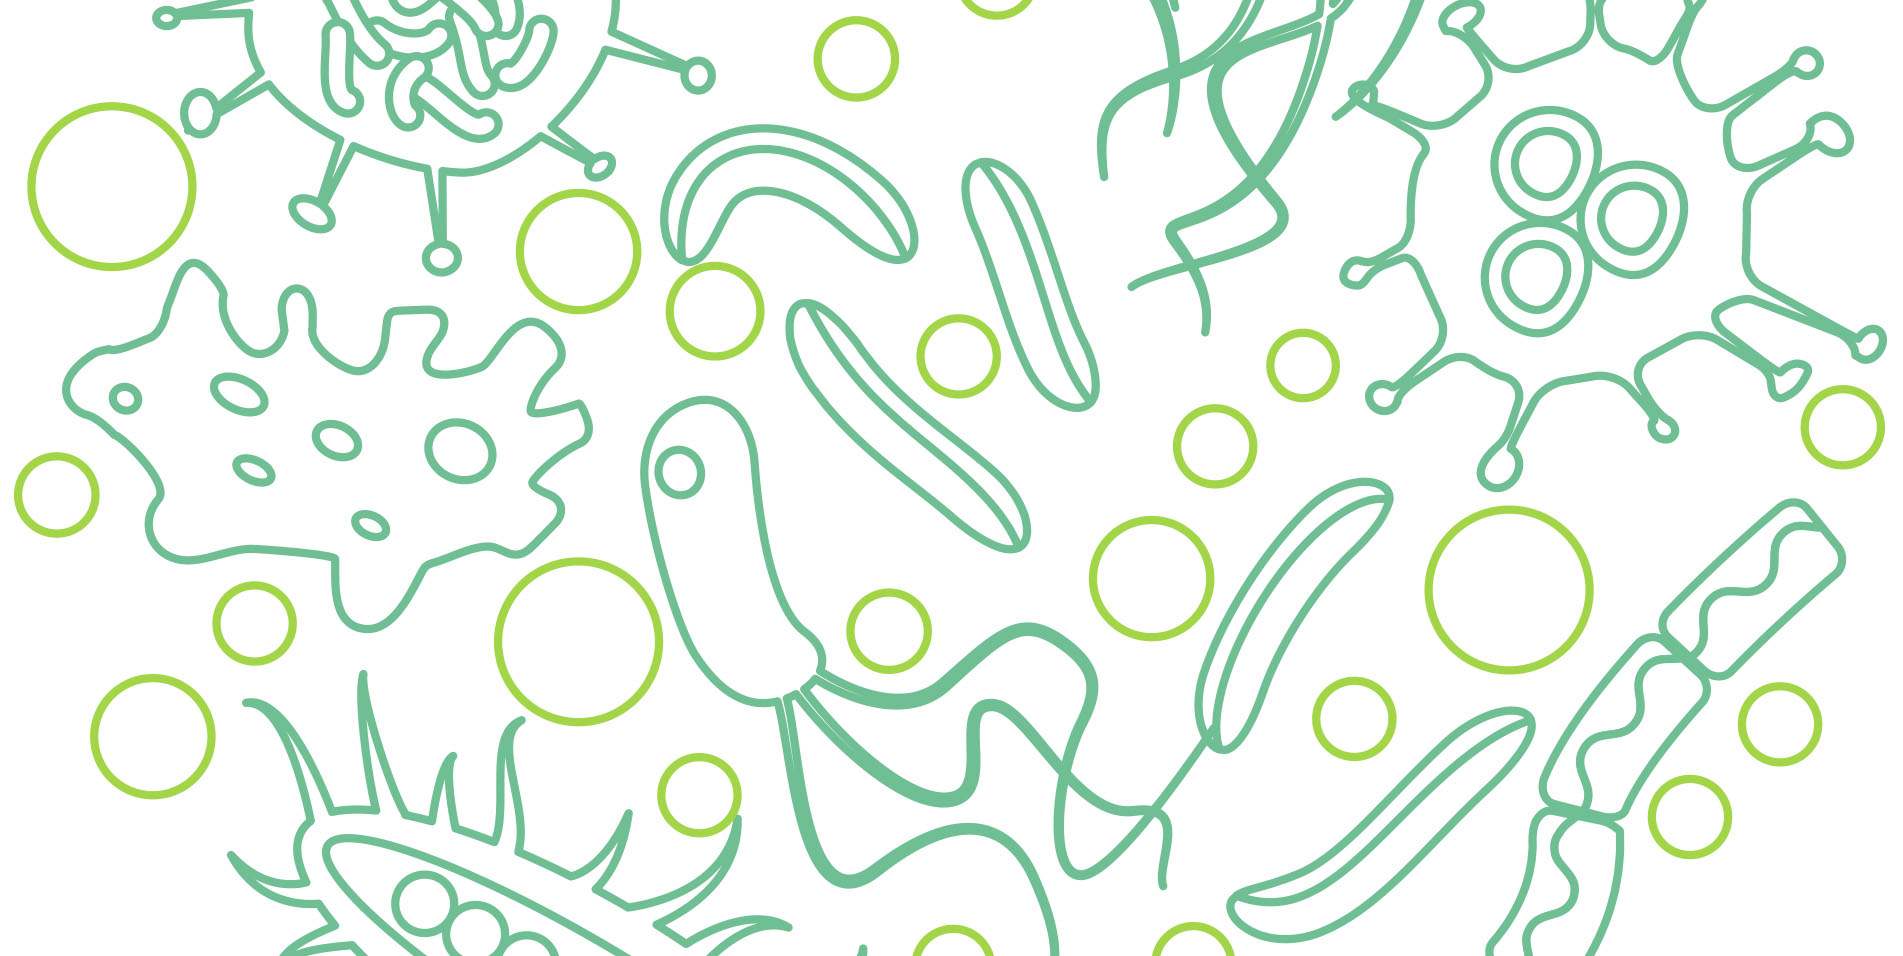 Green line drawing illustrating a variety of microorganisms (magnified view)